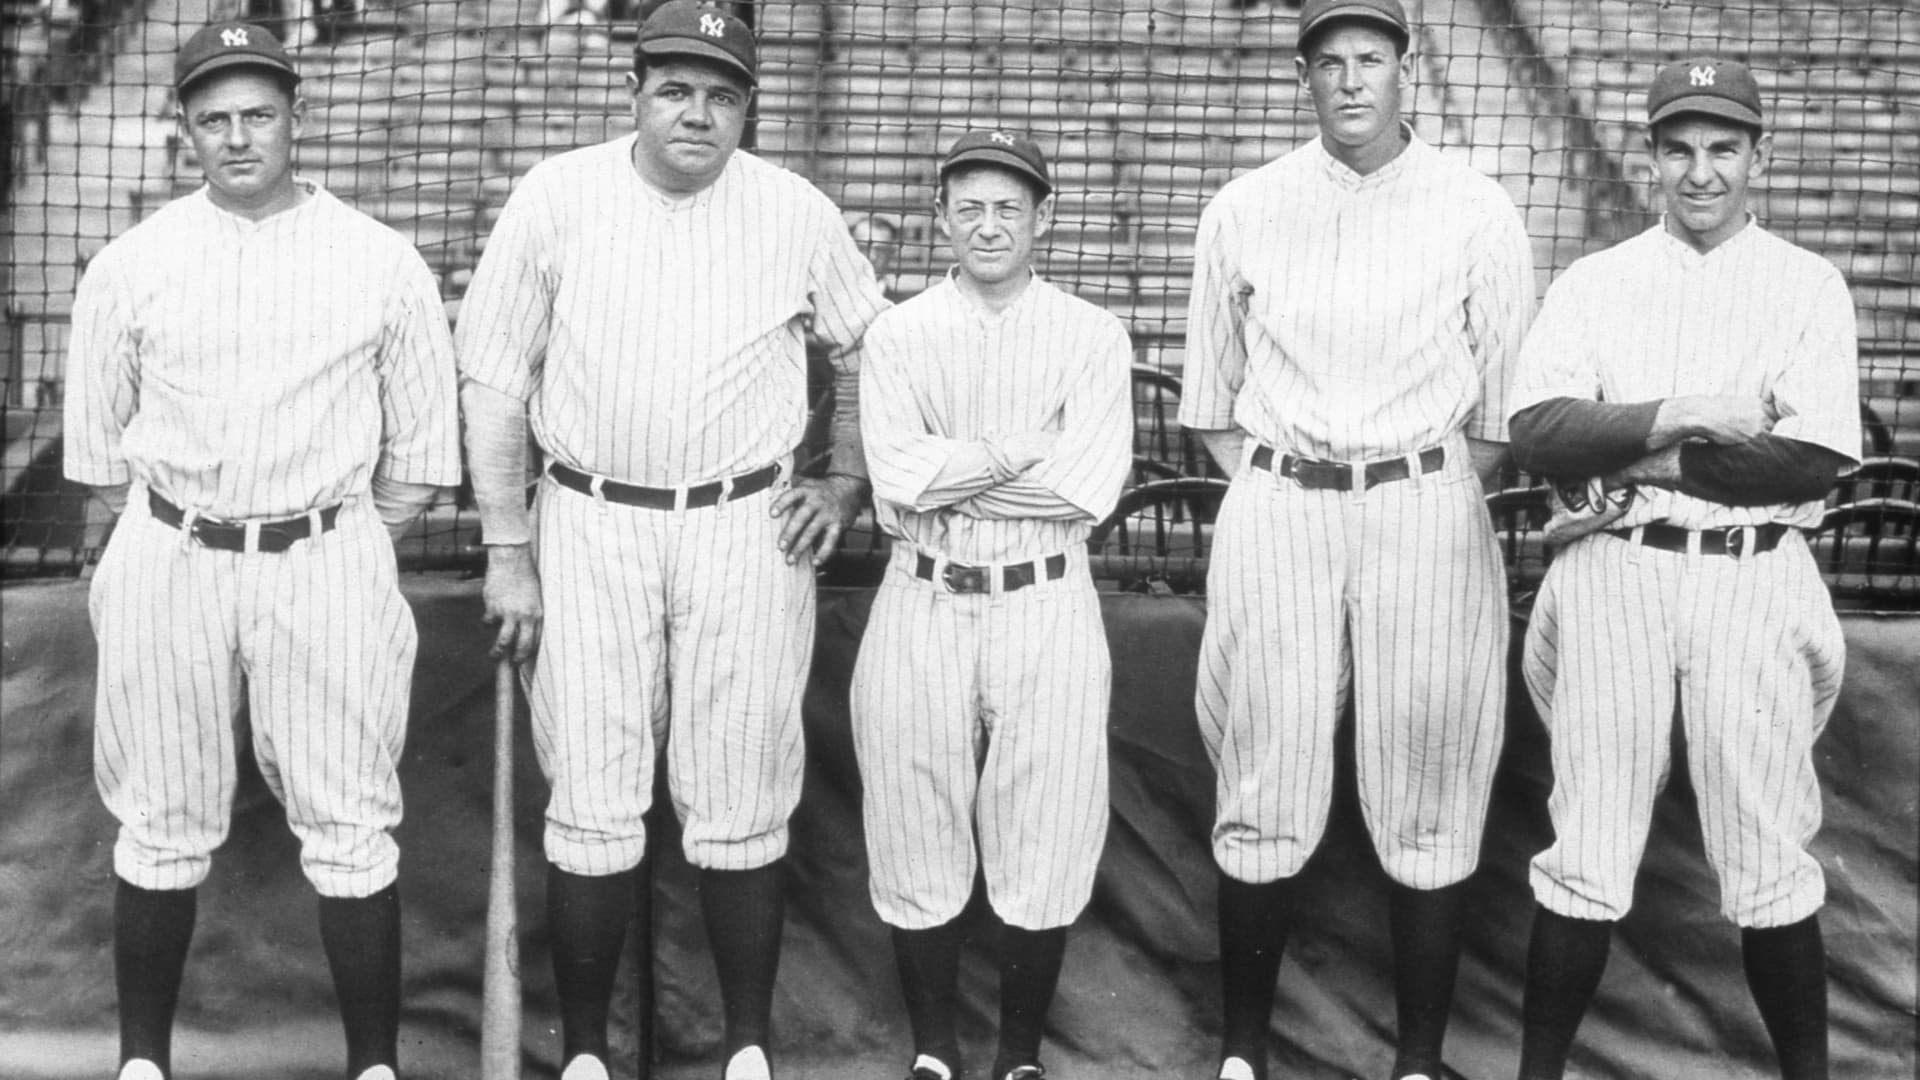 (L-R) Waite Hoyt, Babe Ruth, Huggins, Miller Huggins, Bob Meusel, and Bob Shawkey pose for a photo at Yankee Stadium in New York City in 1927.